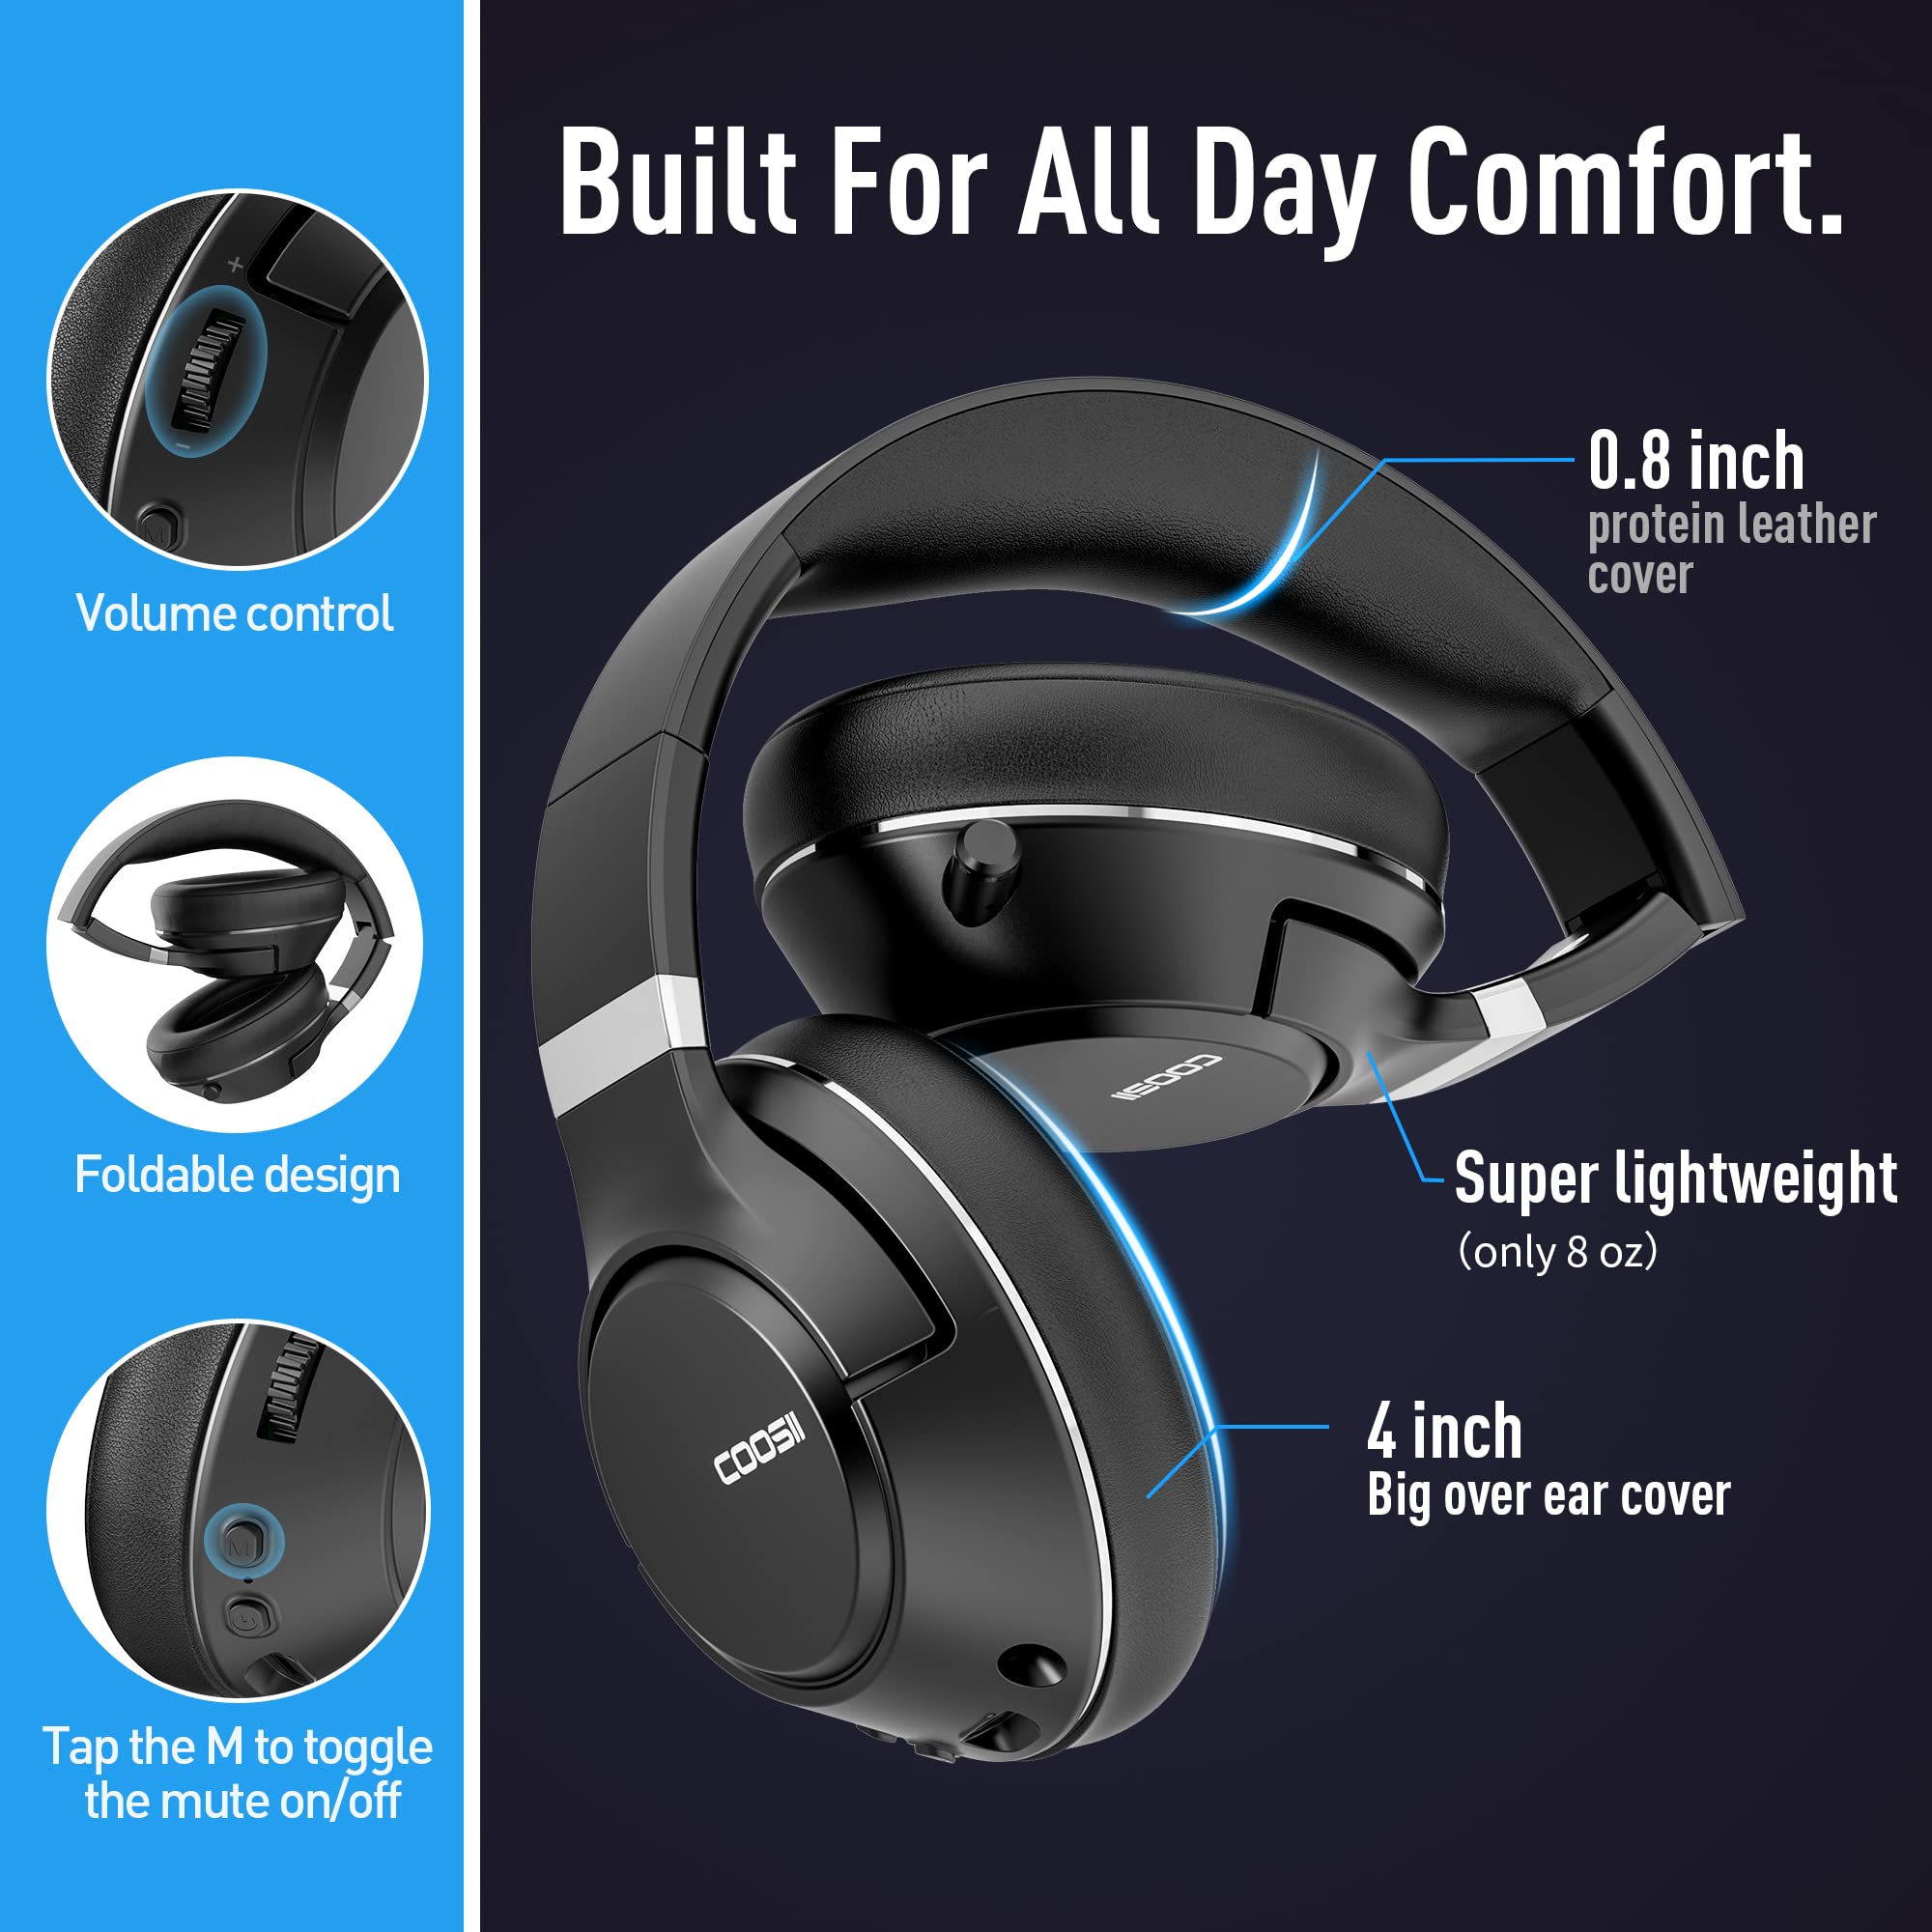 COOSII Wireless Headsets with Microphone for Gaming Study Meetings Conference, Bluetooth Headphone Foldable Over Ear Soft 40H with Retractable Mic, USB Dongle for PS5 PS4 PC Computer Cellphone Laptop